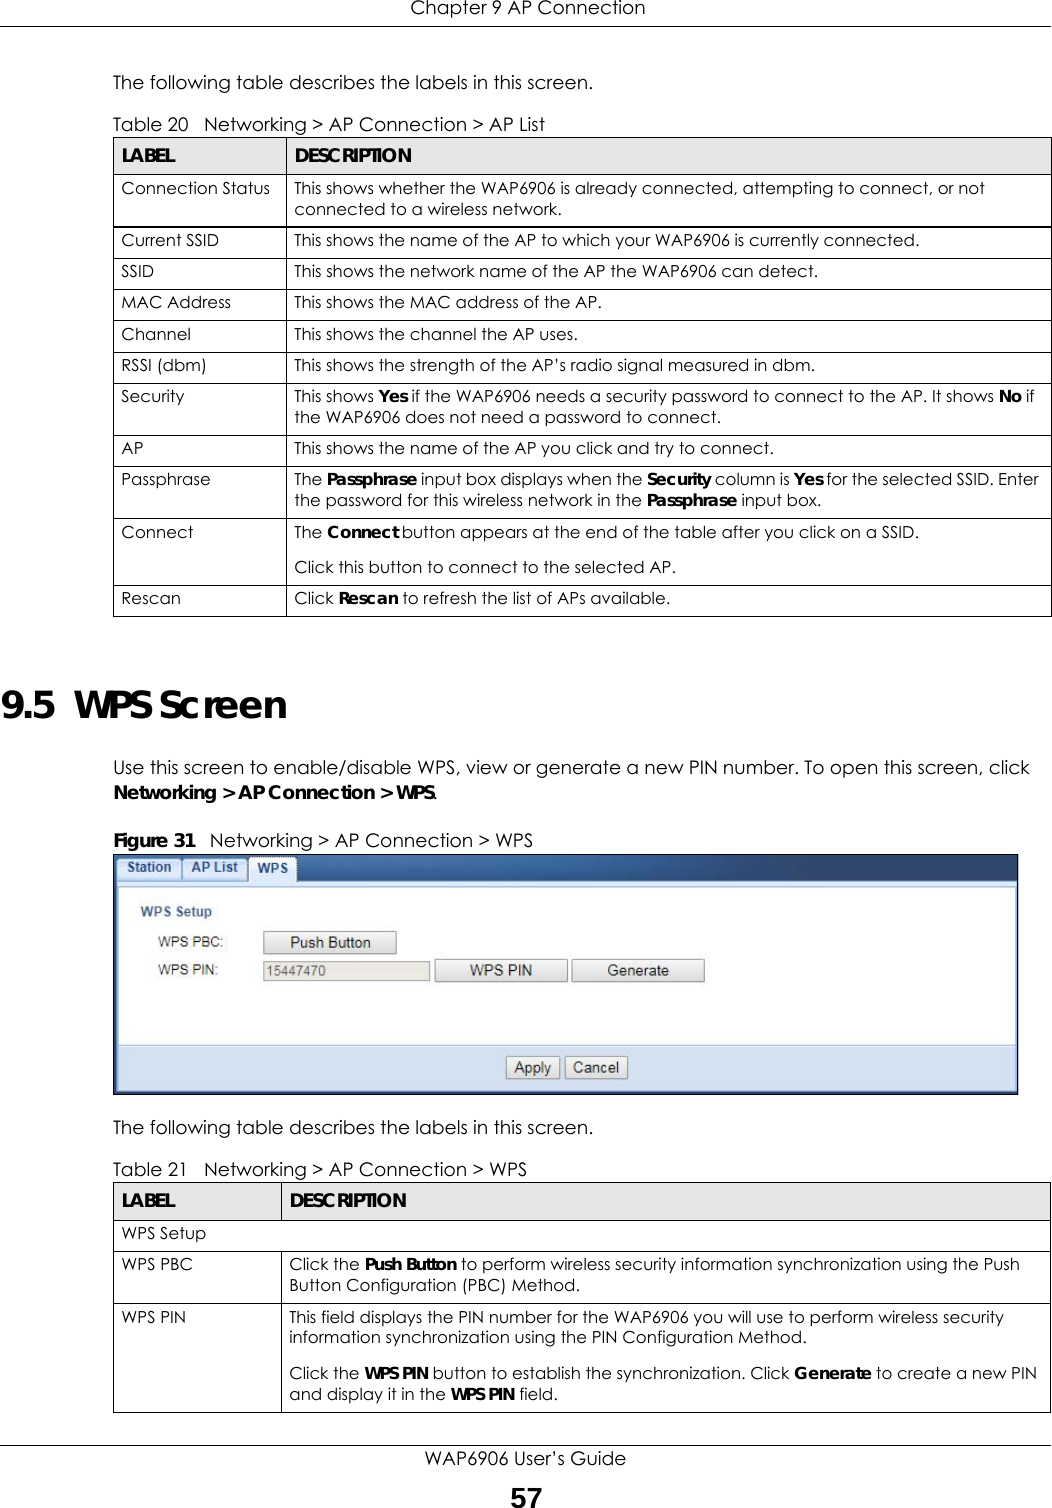  Chapter 9 AP ConnectionWAP6906 User’s Guide57The following table describes the labels in this screen. 9.5  WPS ScreenUse this screen to enable/disable WPS, view or generate a new PIN number. To open this screen, click Networking &gt; AP Connection &gt; WPS.Figure 31   Networking &gt; AP Connection &gt; WPSThe following table describes the labels in this screen.Table 20   Networking &gt; AP Connection &gt; AP ListLABEL DESCRIPTIONConnection Status This shows whether the WAP6906 is already connected, attempting to connect, or not connected to a wireless network.Current SSID This shows the name of the AP to which your WAP6906 is currently connected.SSID This shows the network name of the AP the WAP6906 can detect.MAC Address This shows the MAC address of the AP.Channel This shows the channel the AP uses.RSSI (dbm) This shows the strength of the AP’s radio signal measured in dbm.Security This shows Yes if the WAP6906 needs a security password to connect to the AP. It shows No if the WAP6906 does not need a password to connect.AP This shows the name of the AP you click and try to connect.Passphrase The Passphrase input box displays when the Security column is Yes for the selected SSID. Enter the password for this wireless network in the Passphrase input box.Connect The Connect button appears at the end of the table after you click on a SSID.Click this button to connect to the selected AP.Rescan Click Rescan to refresh the list of APs available.Table 21   Networking &gt; AP Connection &gt; WPSLABEL DESCRIPTIONWPS SetupWPS PBC Click the Push Button to perform wireless security information synchronization using the Push Button Configuration (PBC) Method.WPS PIN This field displays the PIN number for the WAP6906 you will use to perform wireless security information synchronization using the PIN Configuration Method.Click the WPS PIN button to establish the synchronization. Click Generate to create a new PIN and display it in the WPS PIN field.